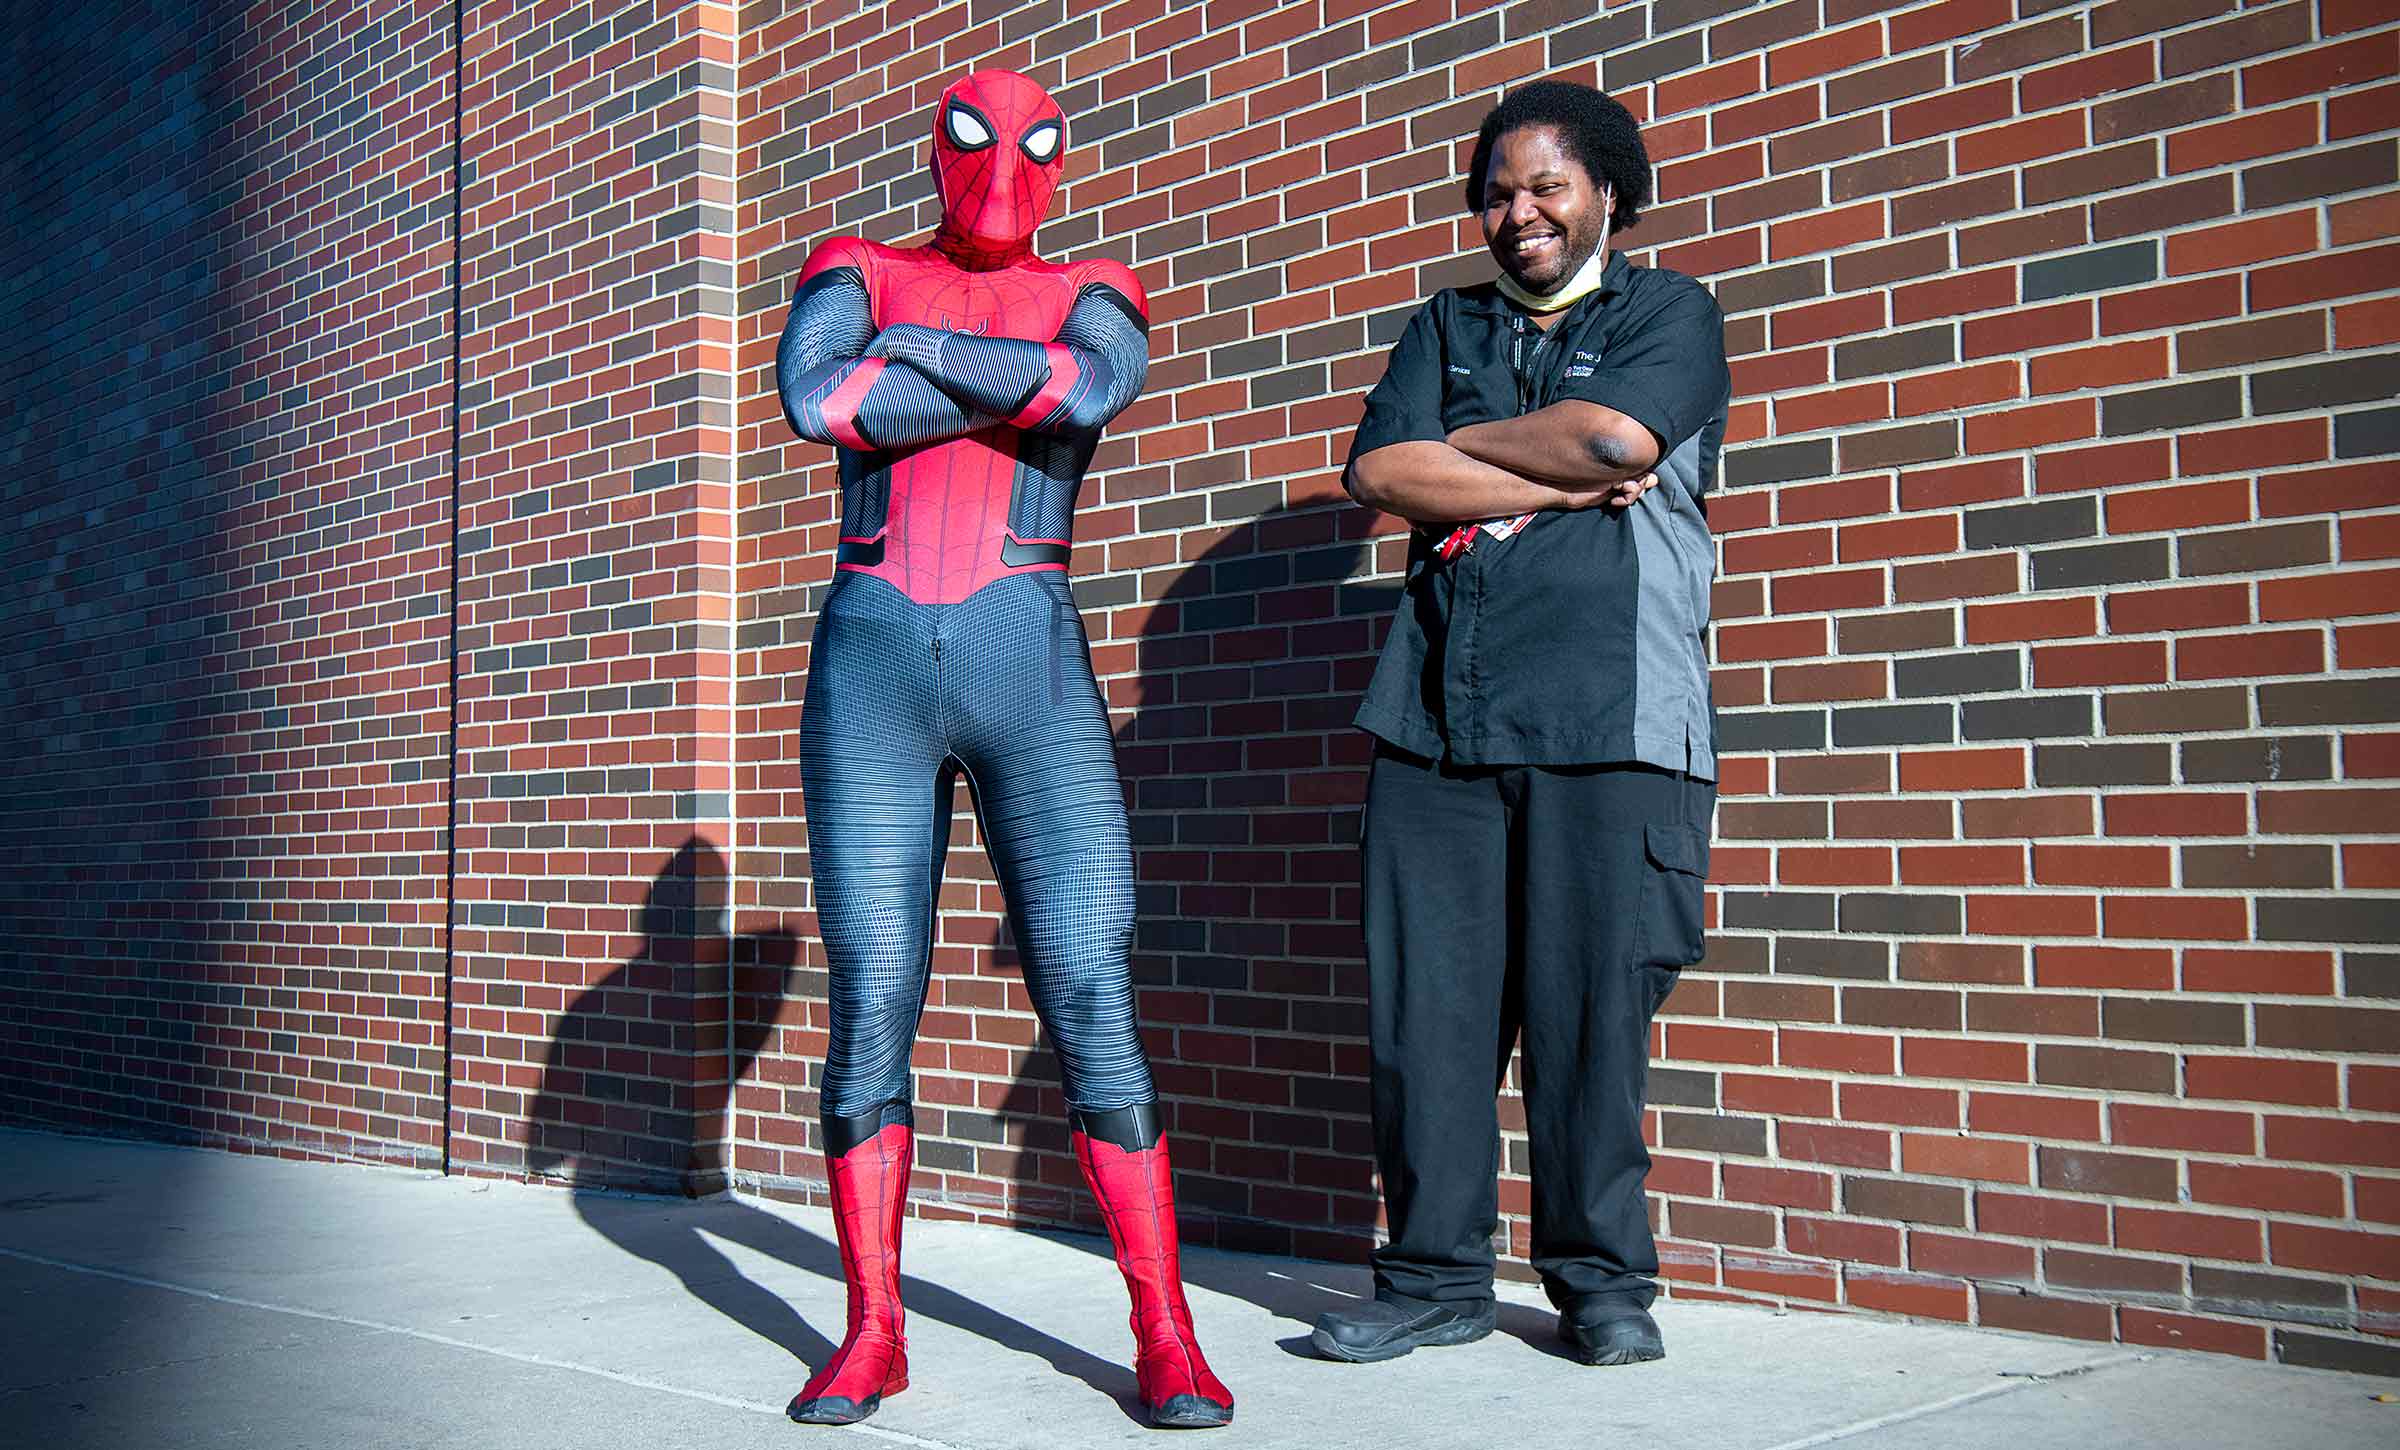 Nurse Phil Re in a Spider-Man costume next to his co-worker